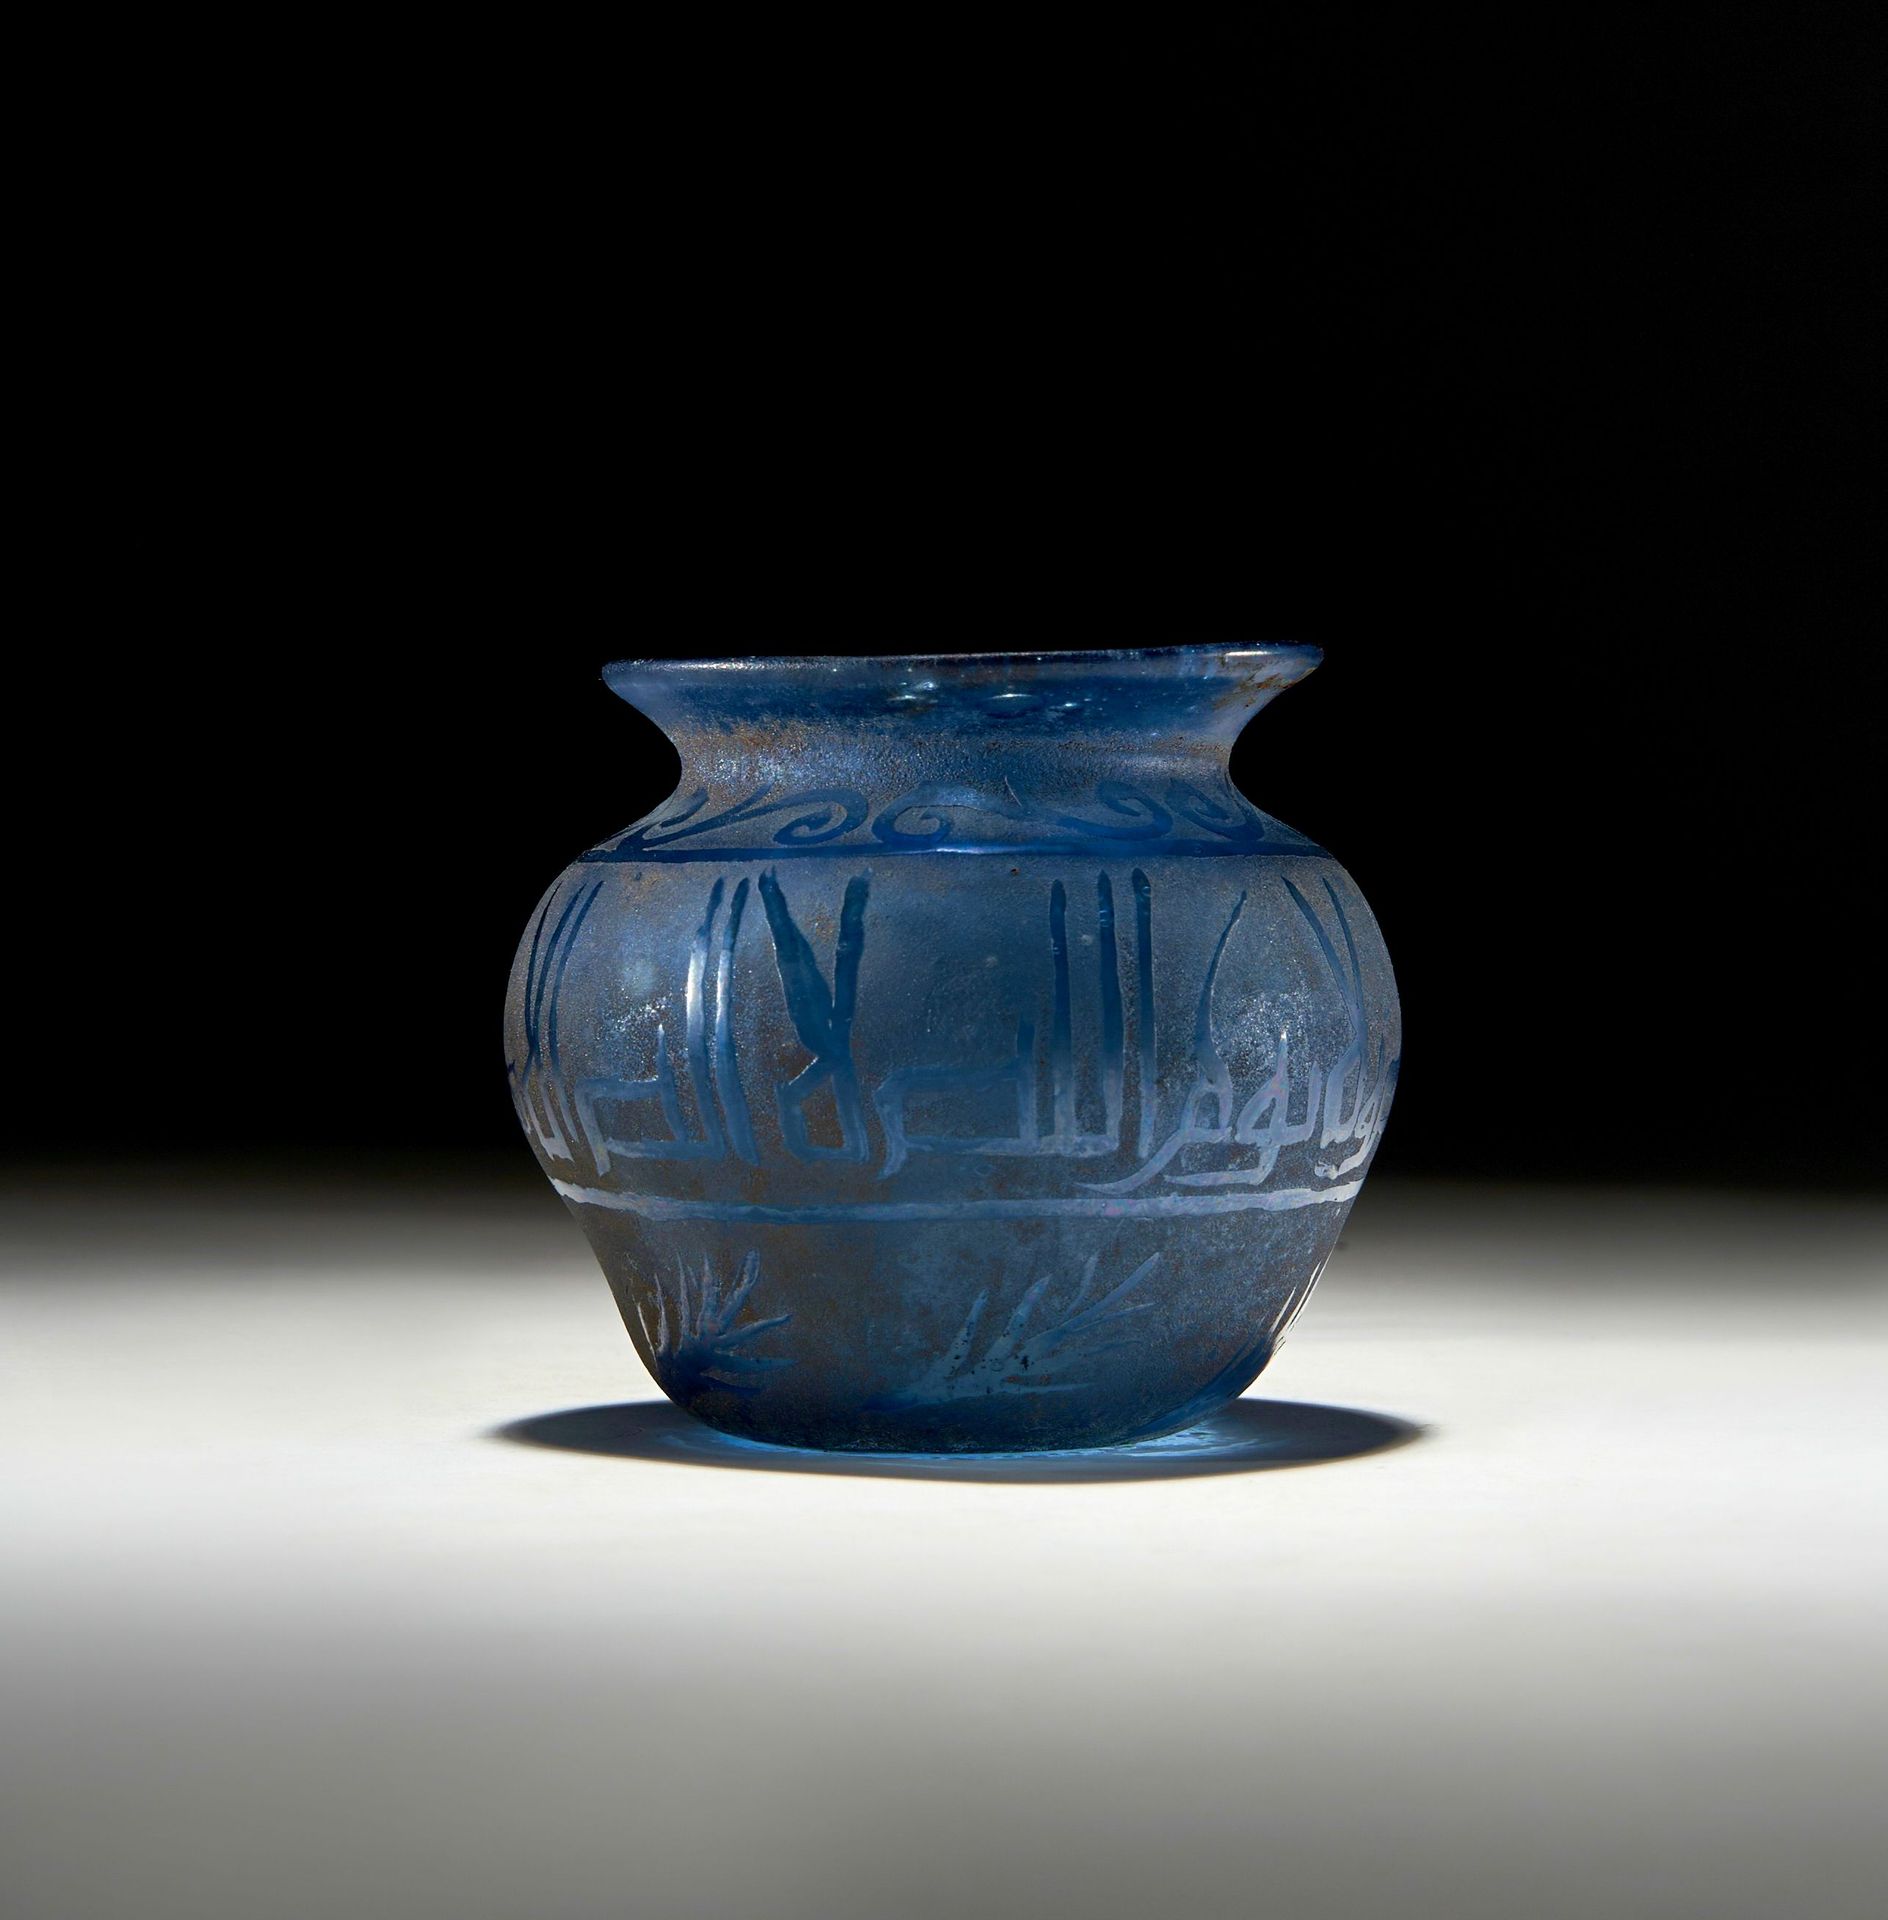 A KUFIC INSCRIBED BLUE GLASS POT, PROBABLY 9TH-11TH CENTURY A.D. VASO IN VETRO B&hellip;